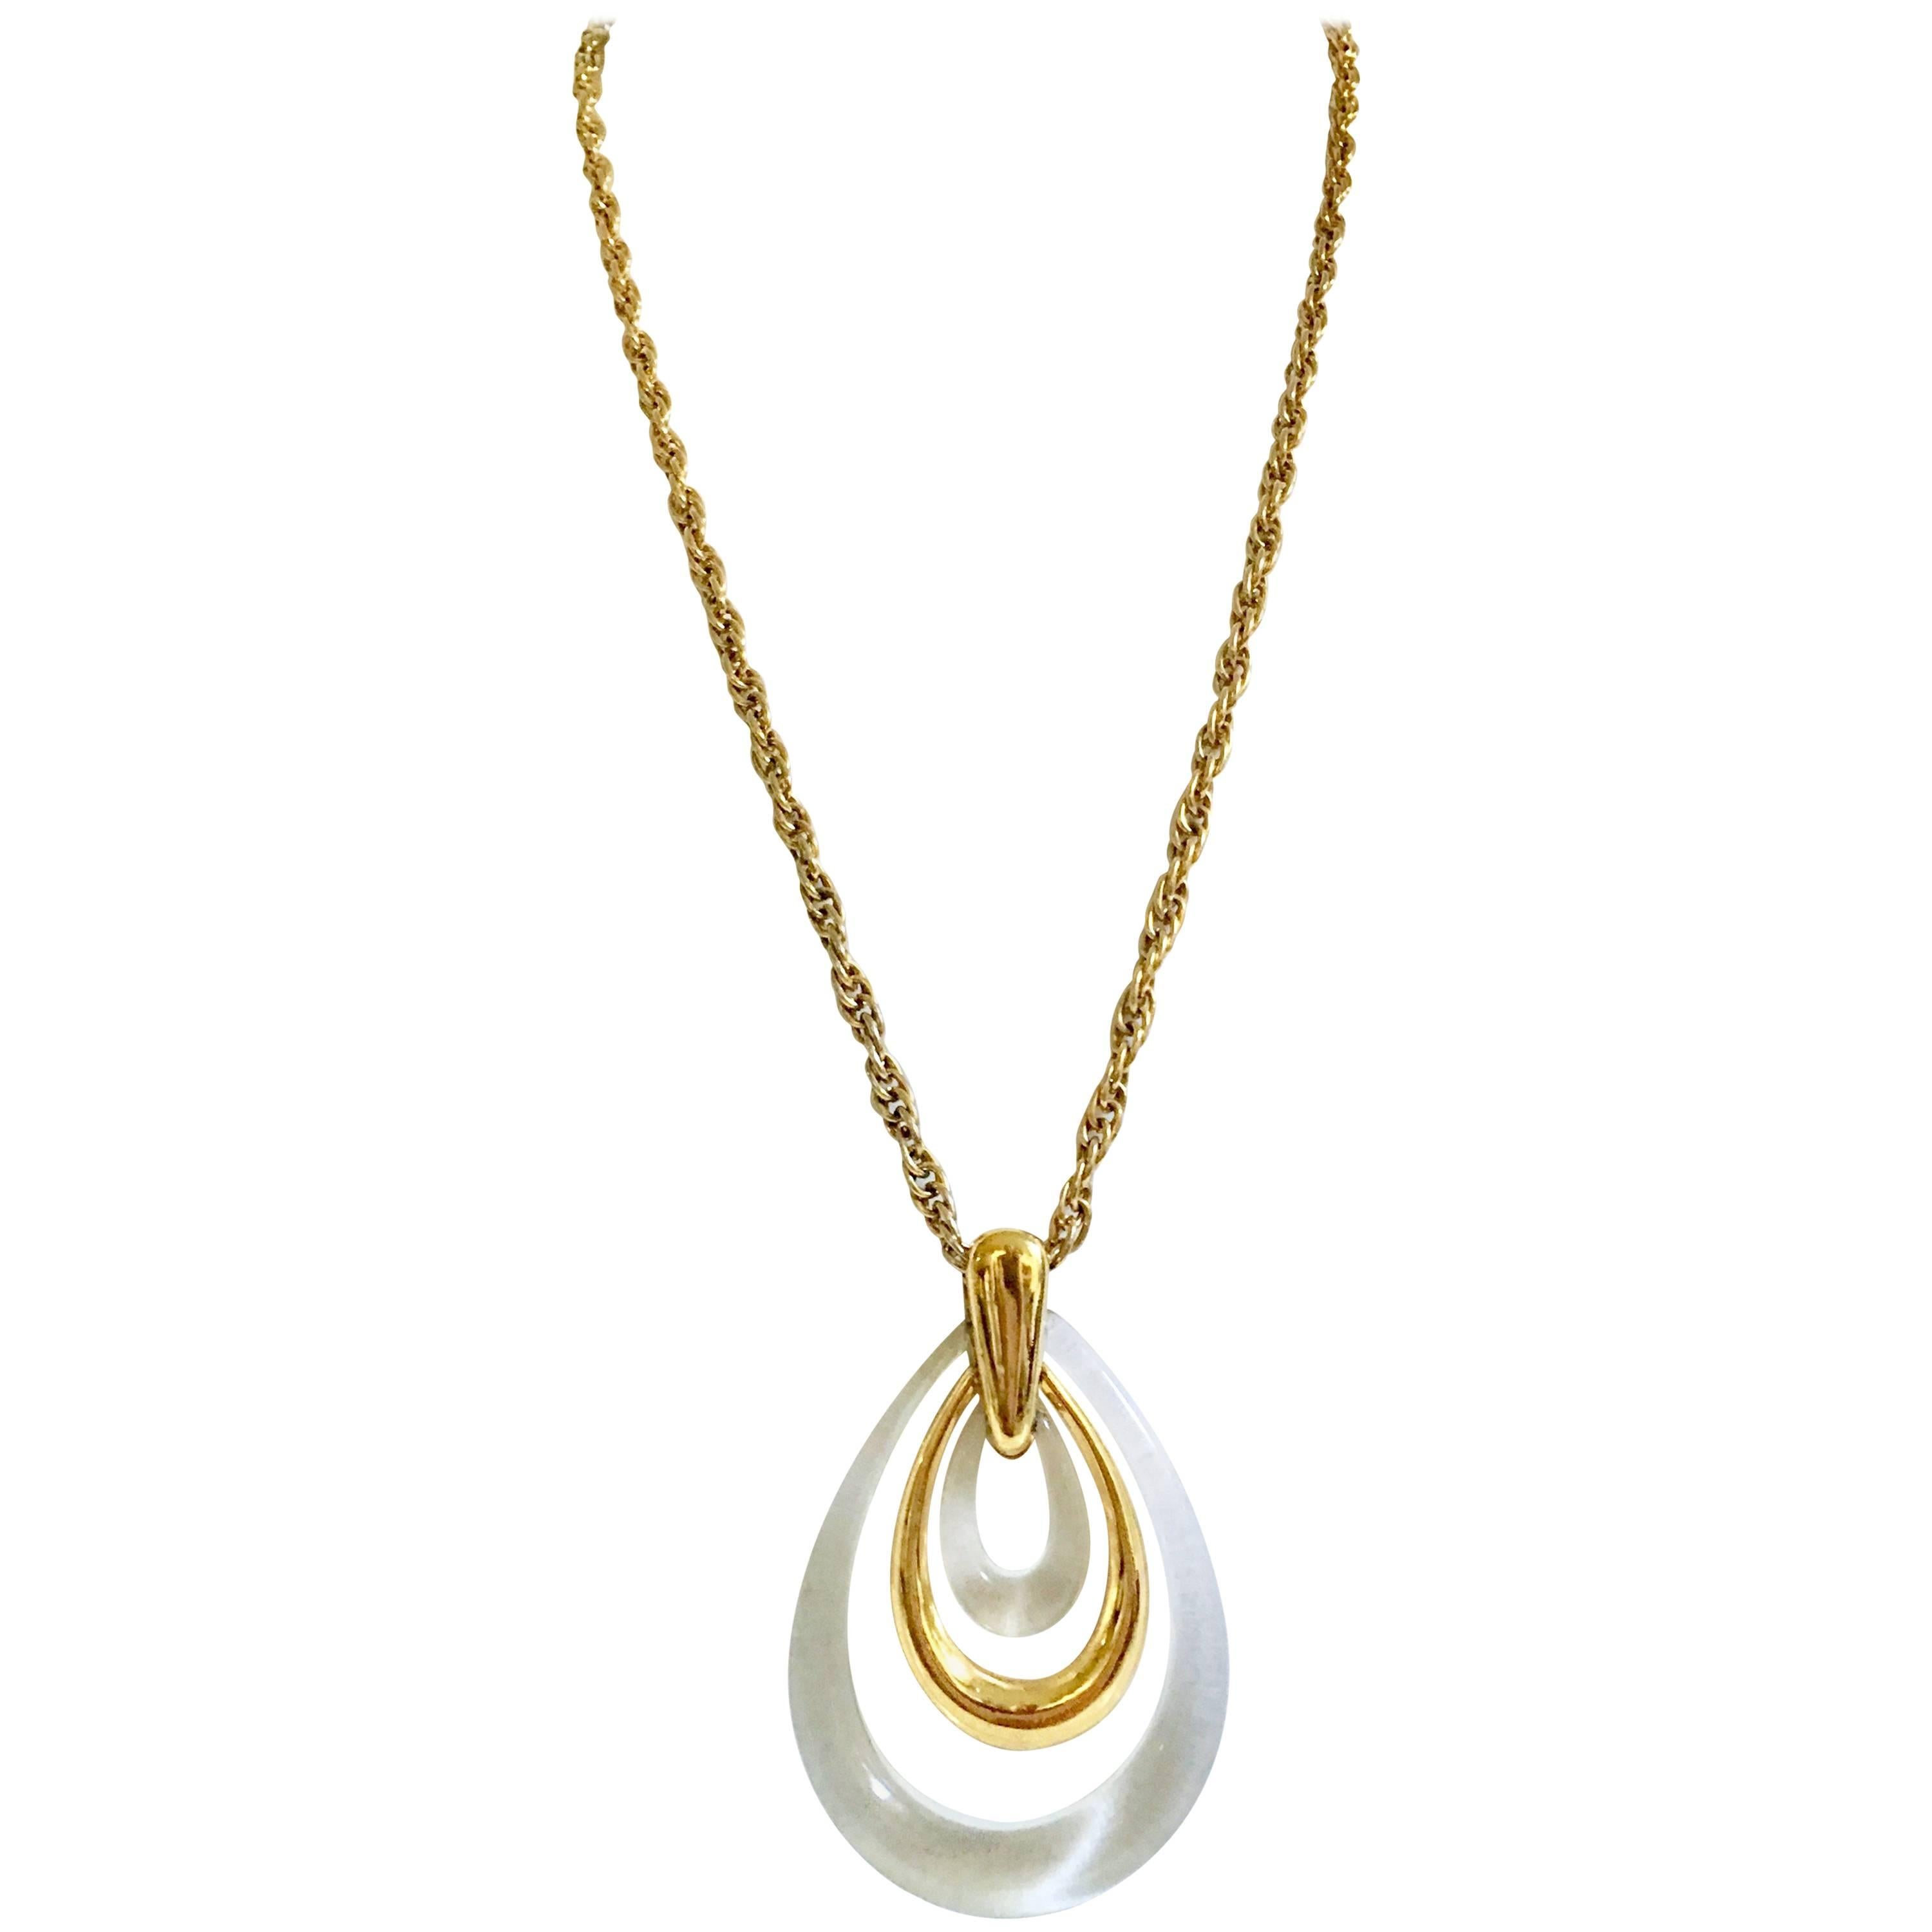 20th Century Lucite & Gilt Gold "Teardrop" Pendant Necklace By, Trifari For Sale